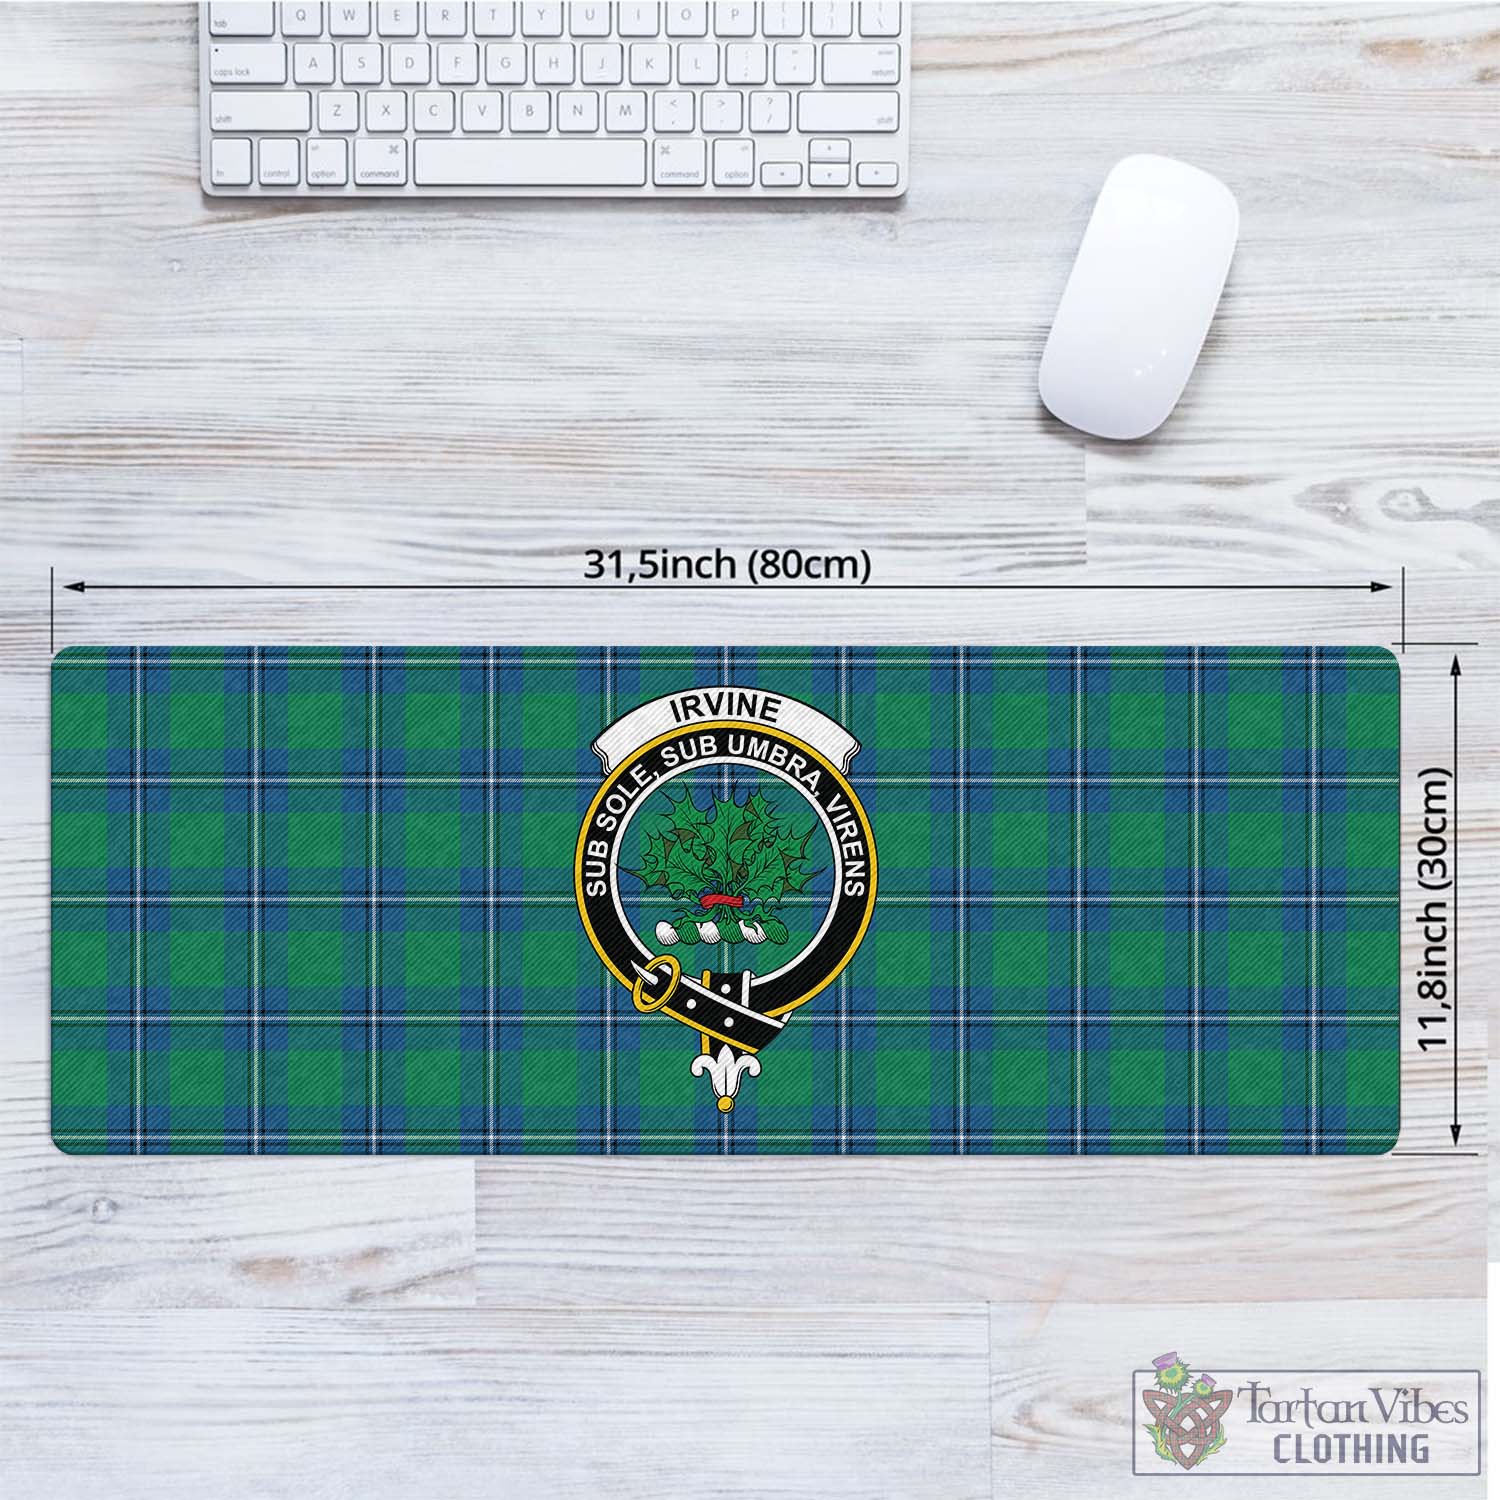 Tartan Vibes Clothing Irvine Ancient Tartan Mouse Pad with Family Crest